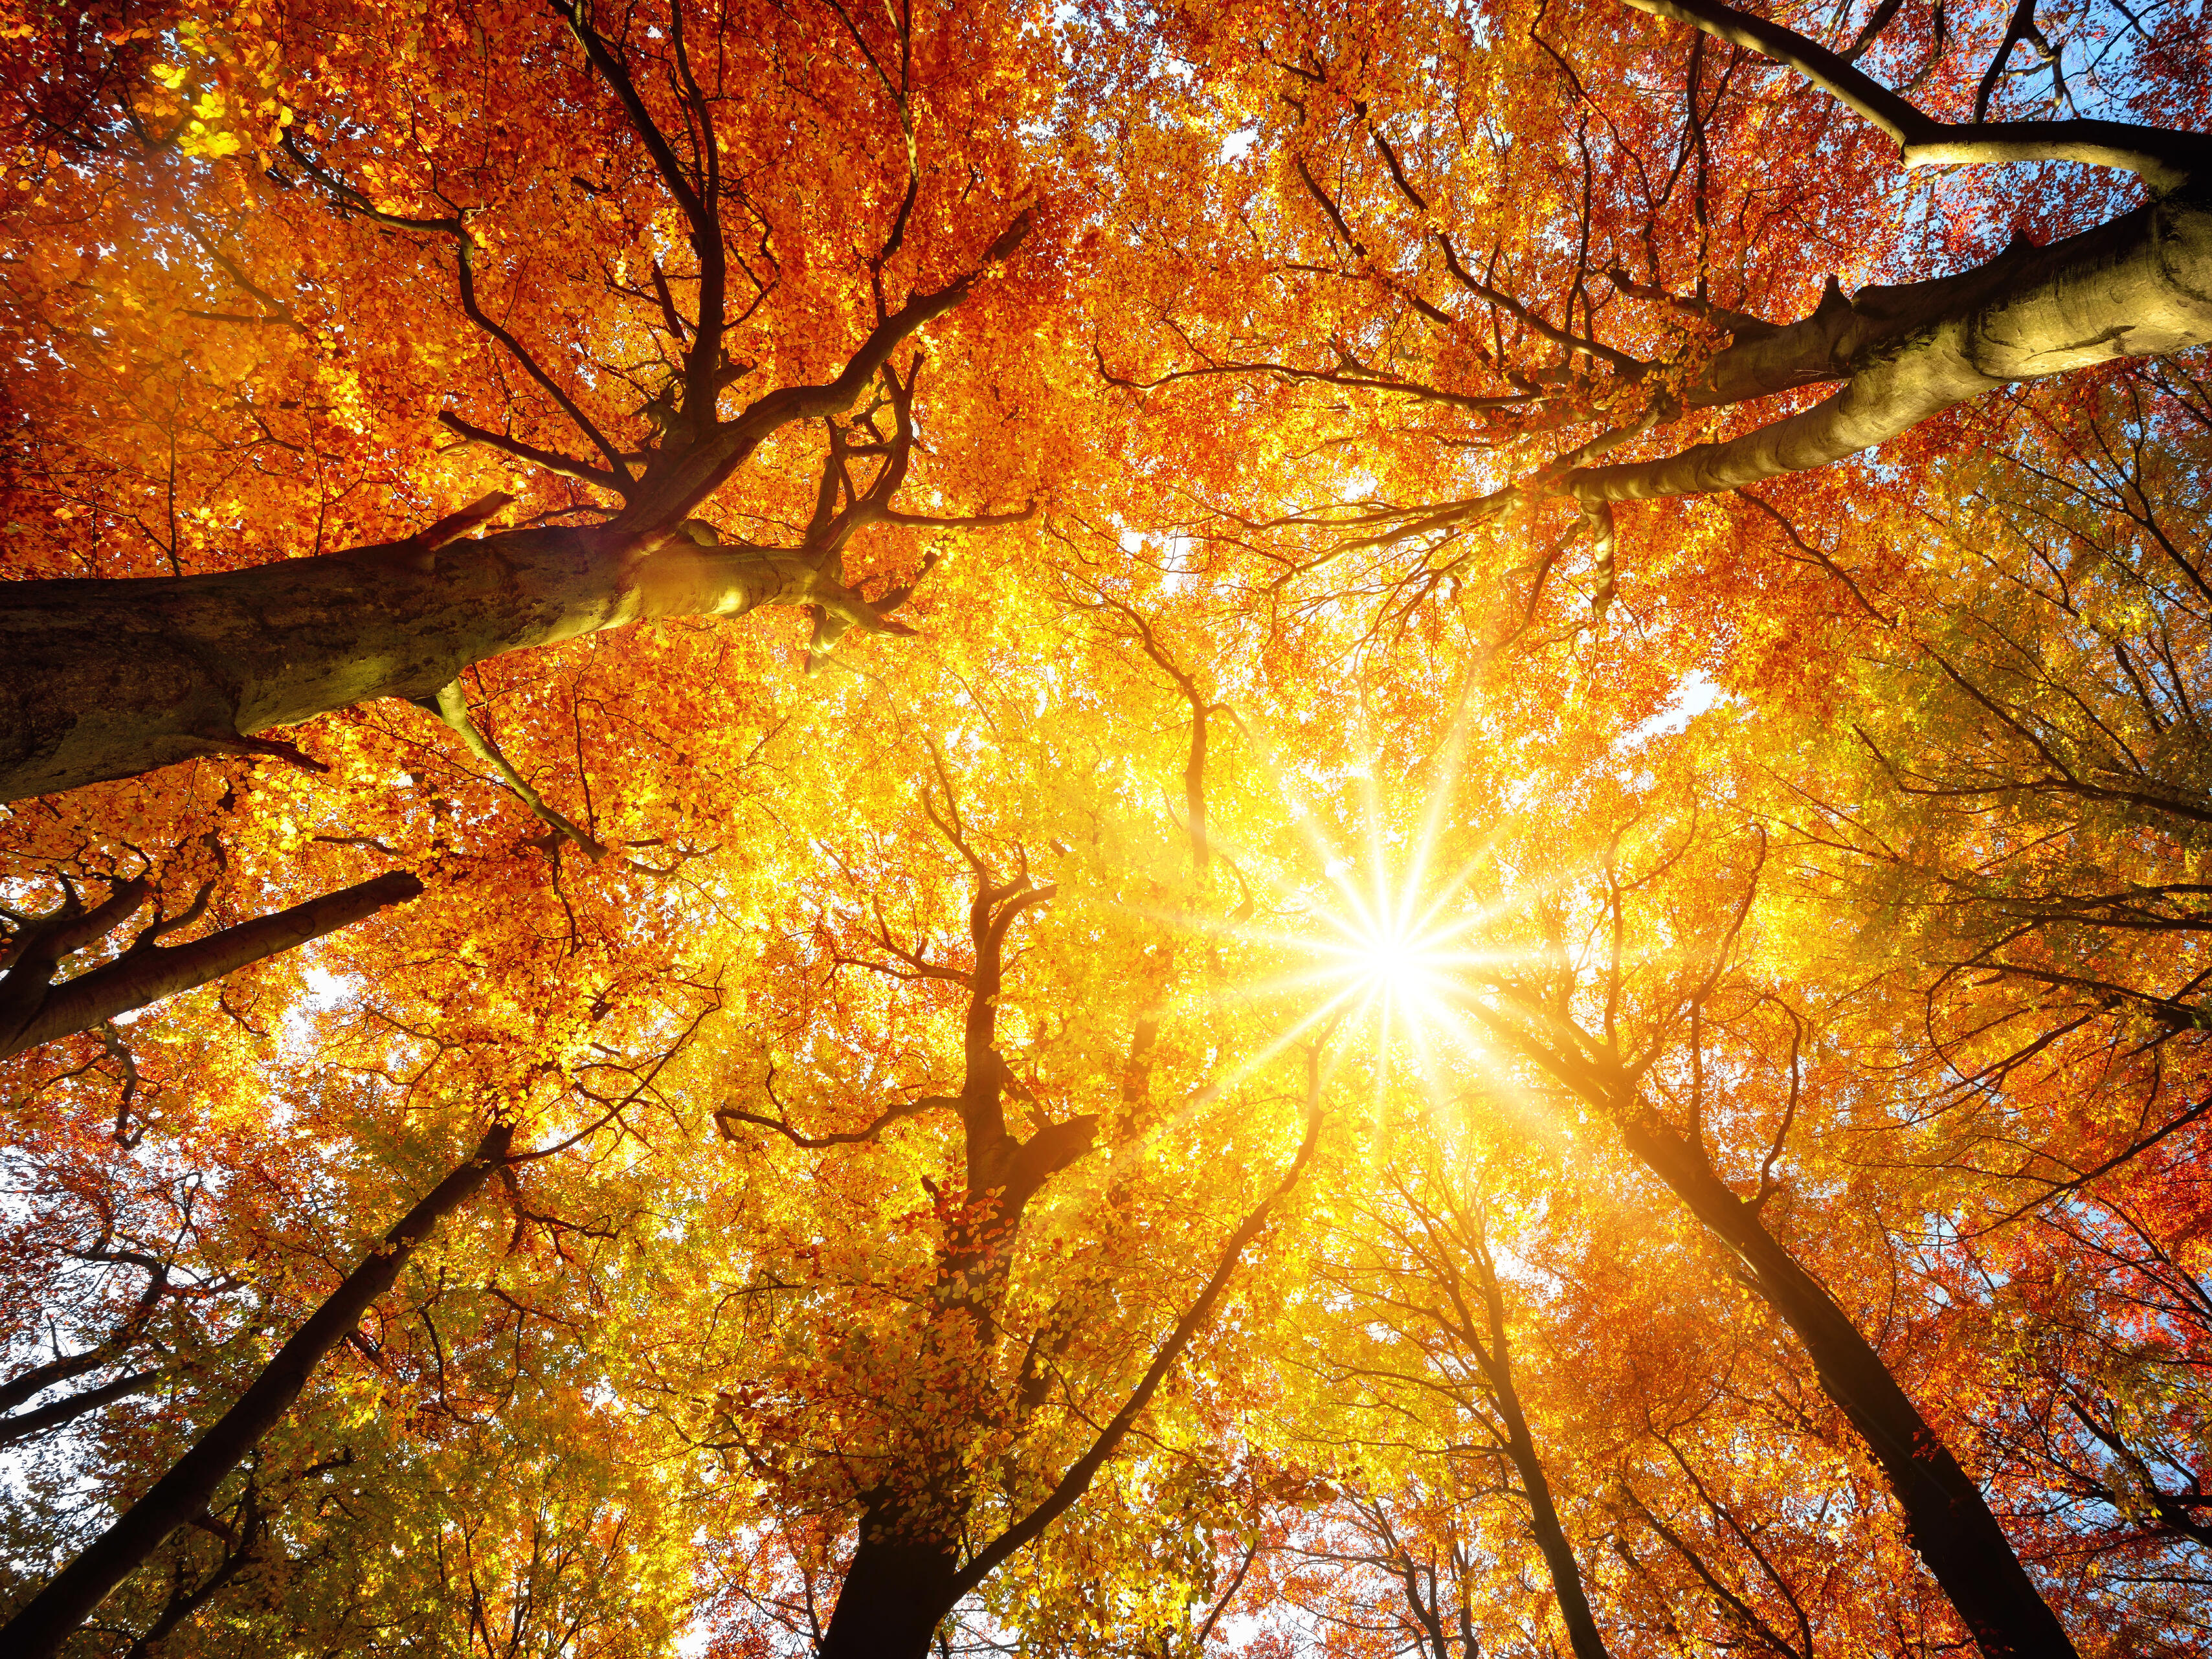 Photos: Turn a new leaf with the best Zoom backgrounds for fall - TechRepublic